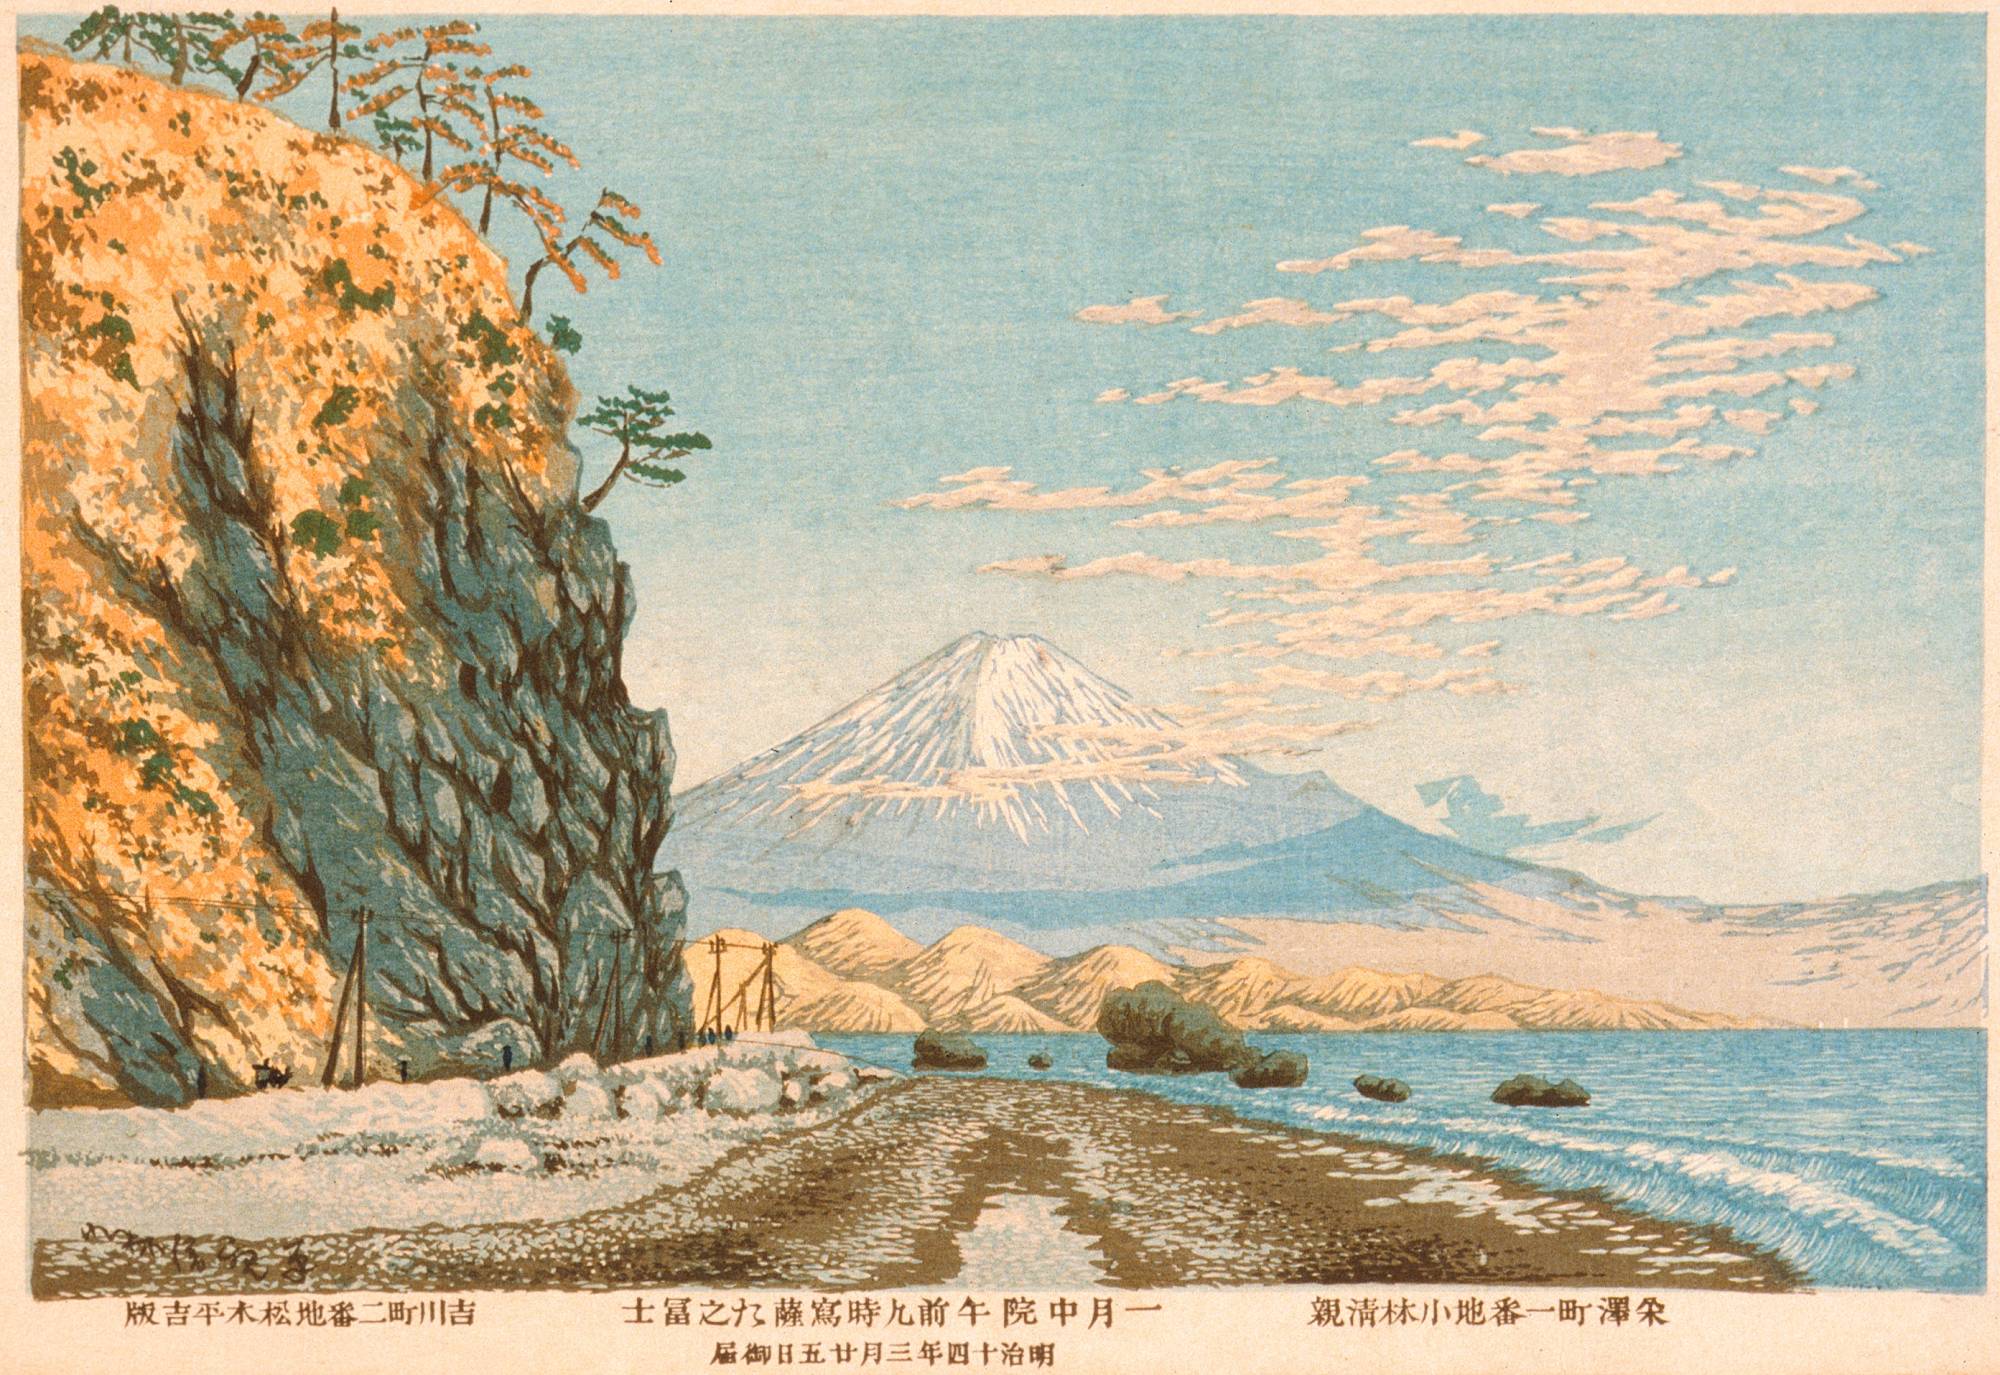 Mount Fuji From Satta, Sketched At 9 A.M. In Mid-January